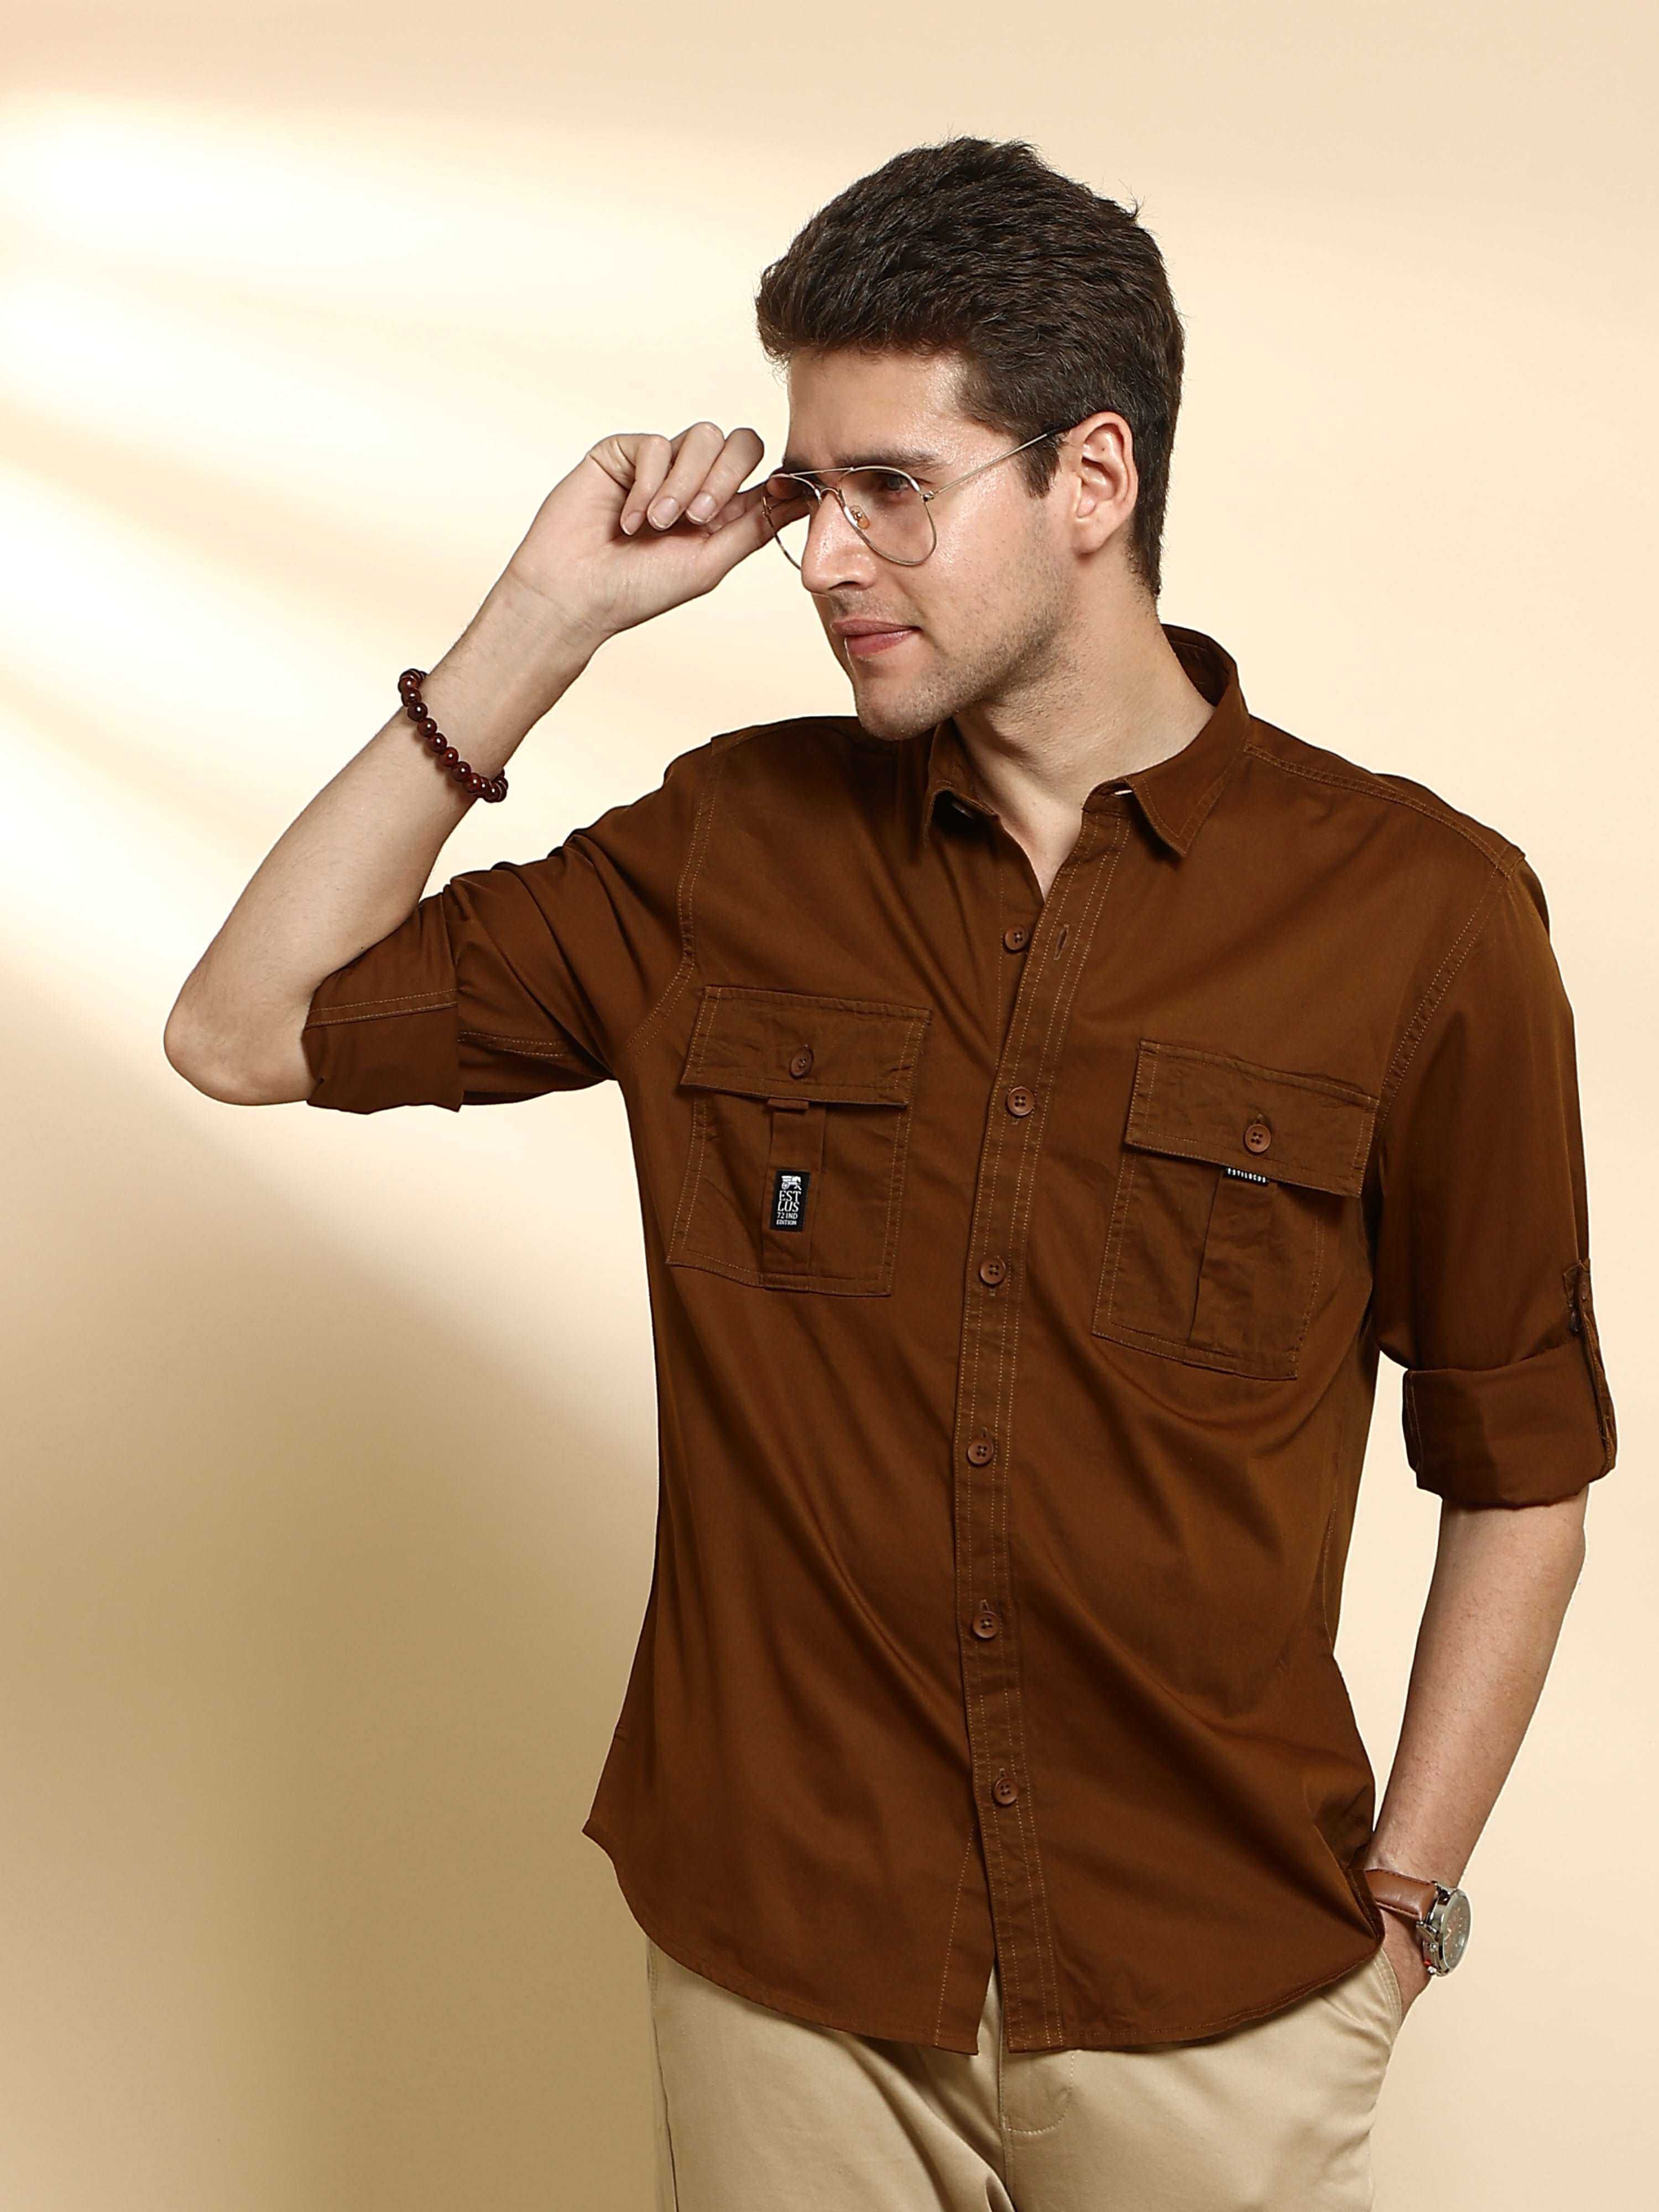 Bronze brown Cargo casual full sleeve shirt shop online at Estilocus. • 100% PREMIUM COTTON • Full-sleeve solid shirt• Cut and sew placket• Regular collar• Double button round cuffs.• Double pocket with flap• Curved hemline• Finest quality sewing with all